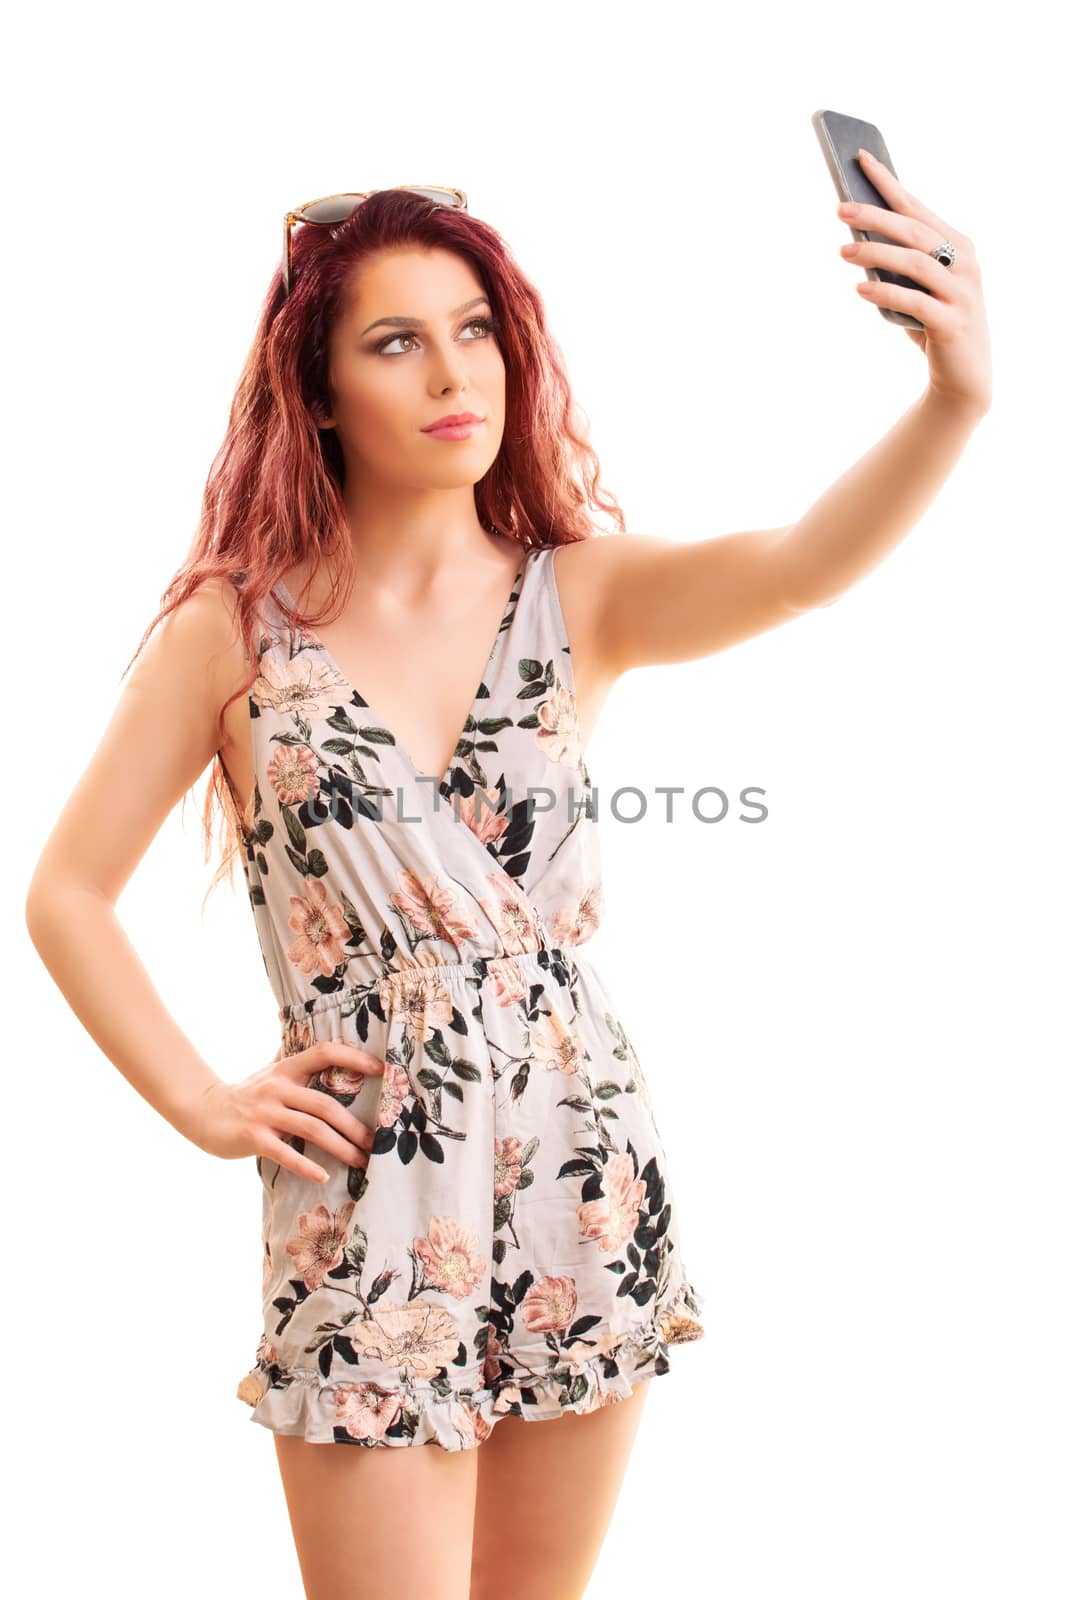 Young beauty taking a selfie by Mendelex